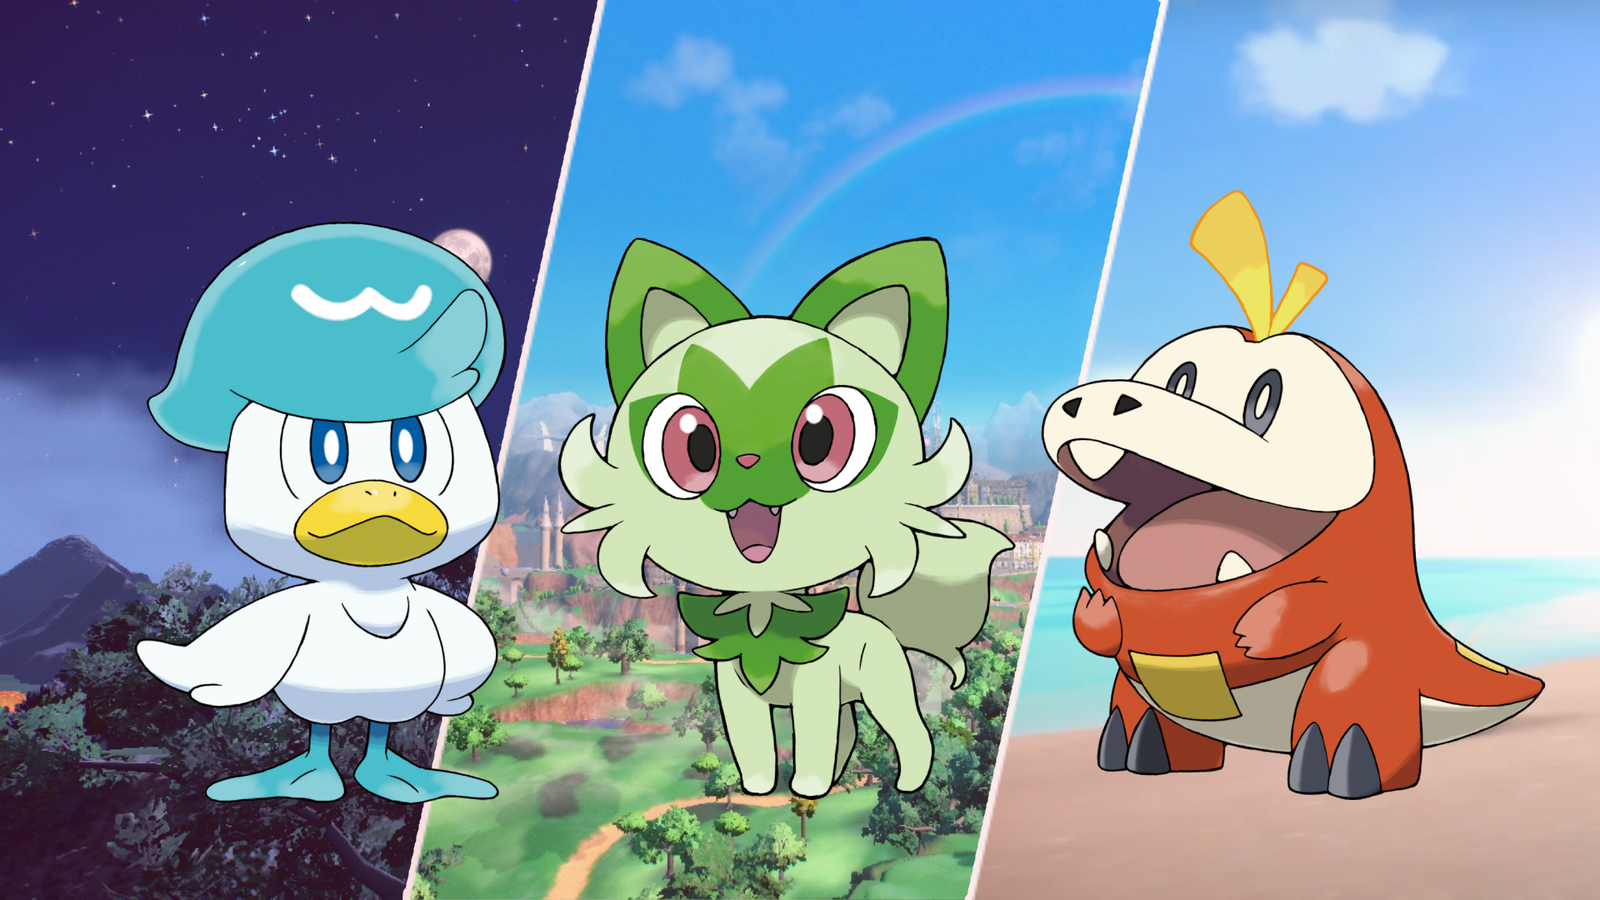 Pokemon Sword and Shield Anime Art Shows New Starters